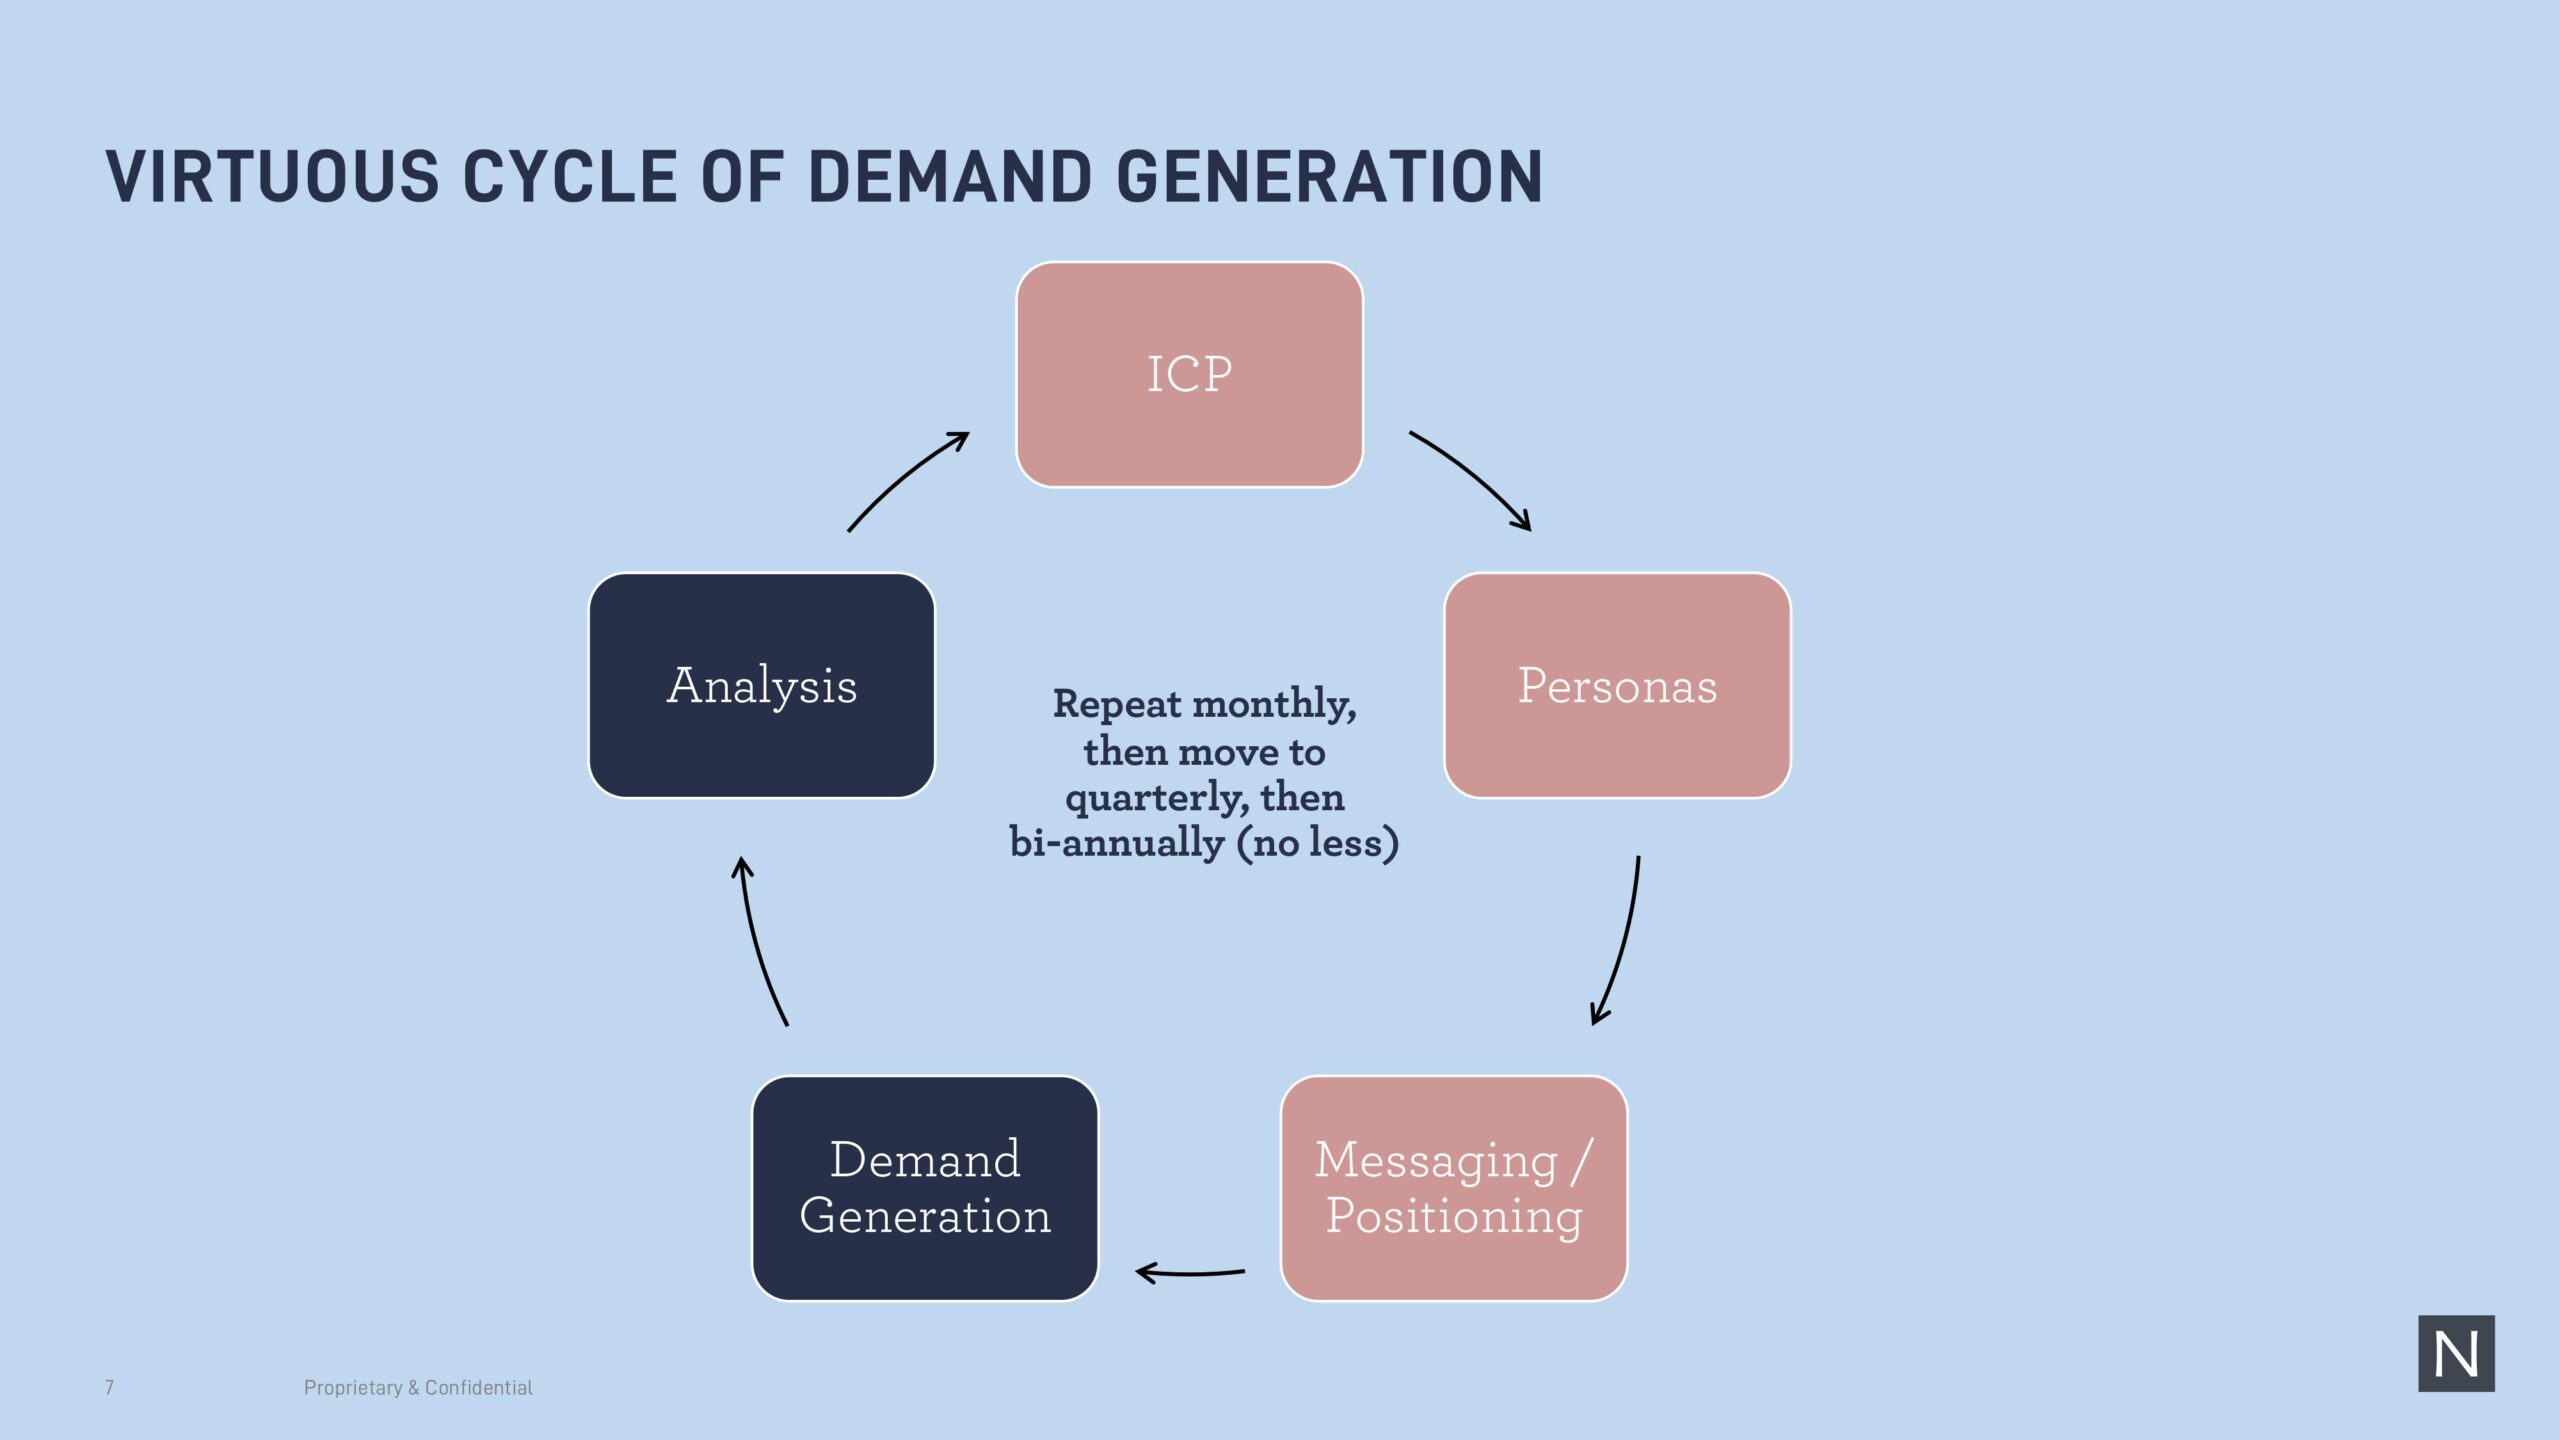 Graph showing the wheel of influence between ICP, Personas, Messaging and Positioning, Demand Generation, and Analysis.